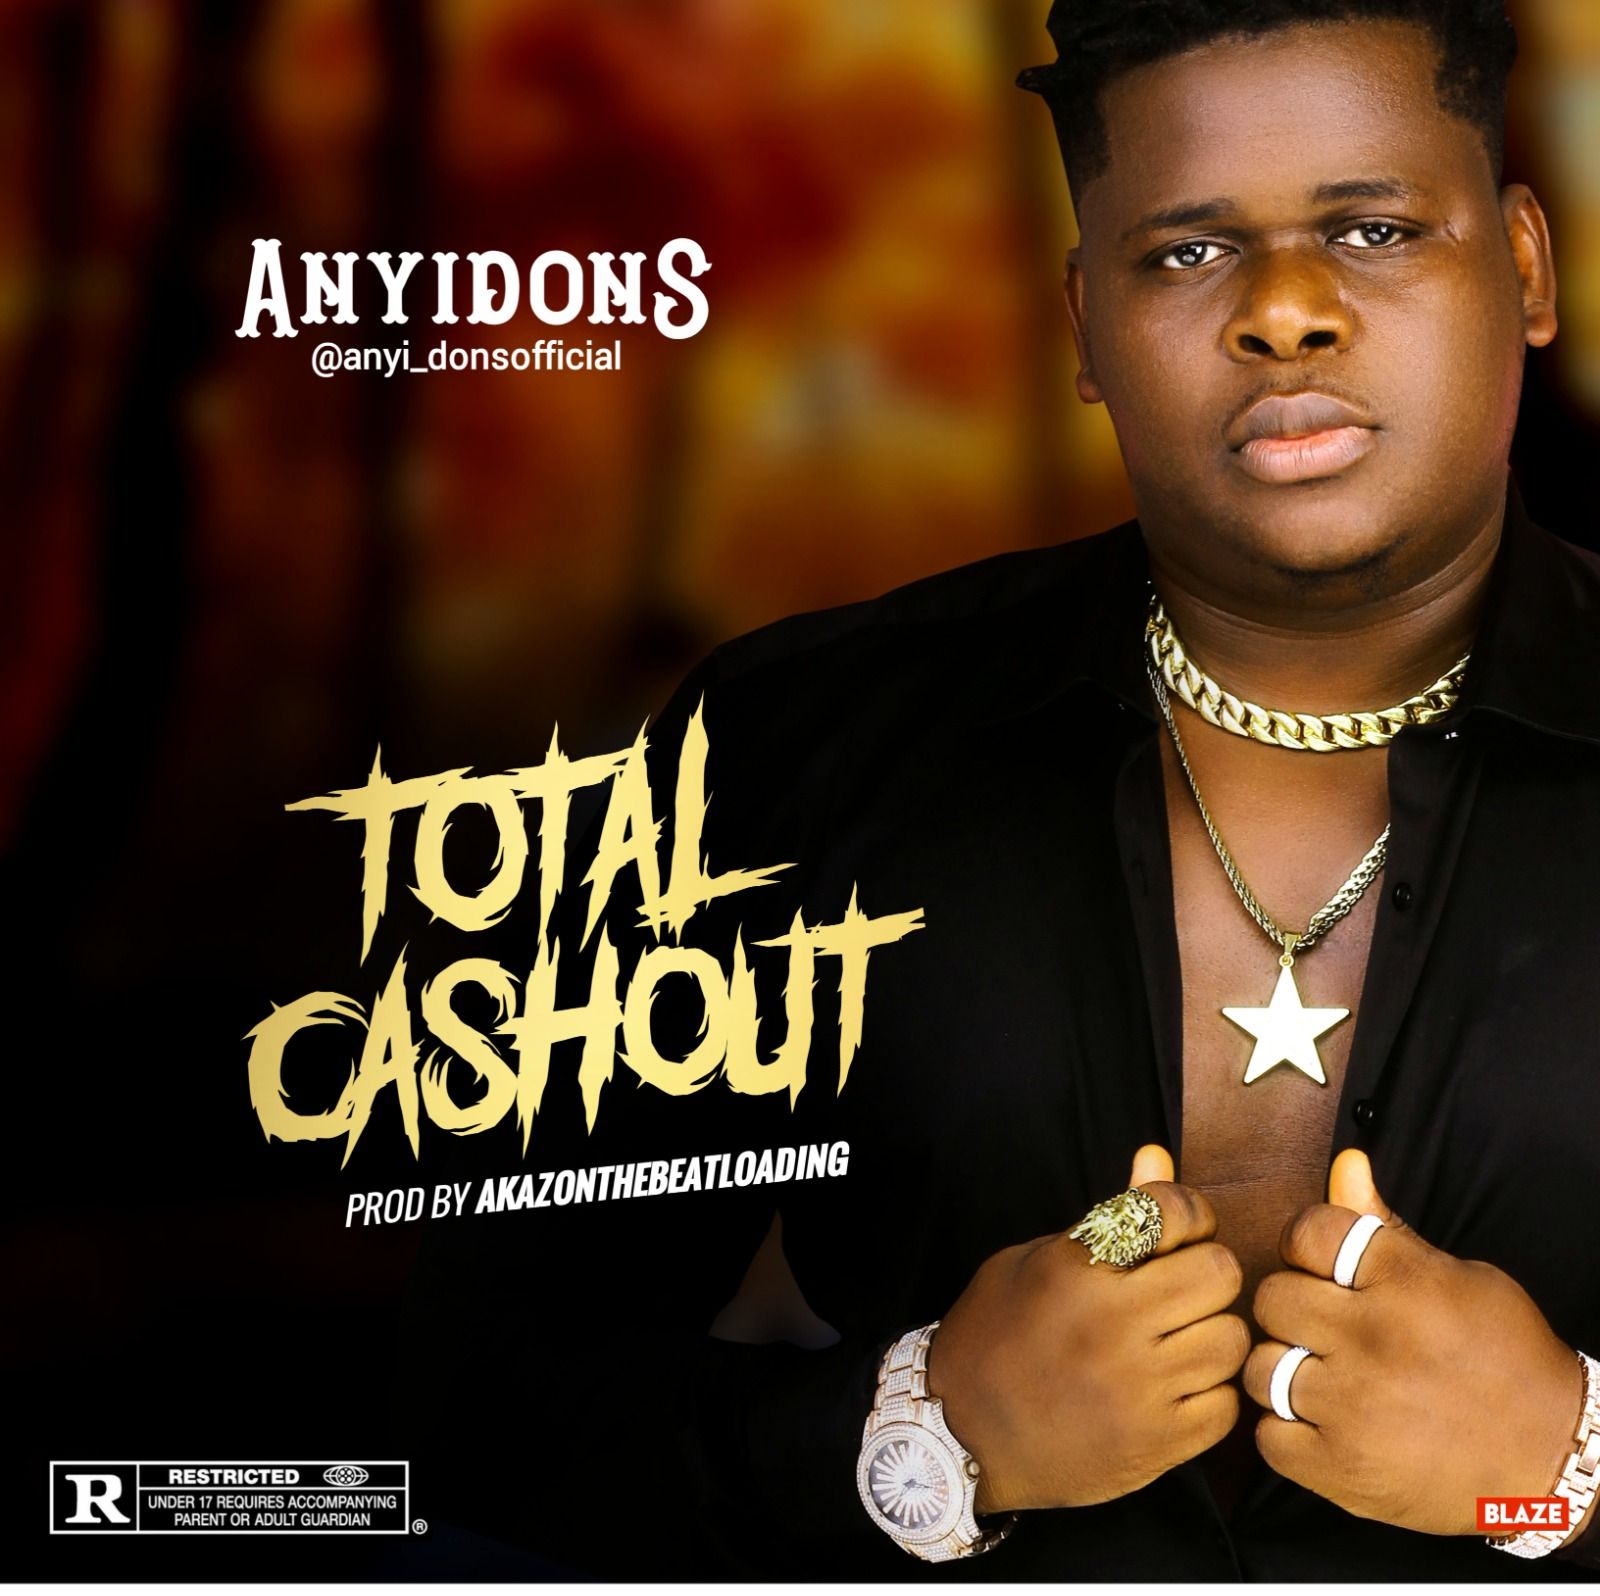 Anyidons – Total Cashout